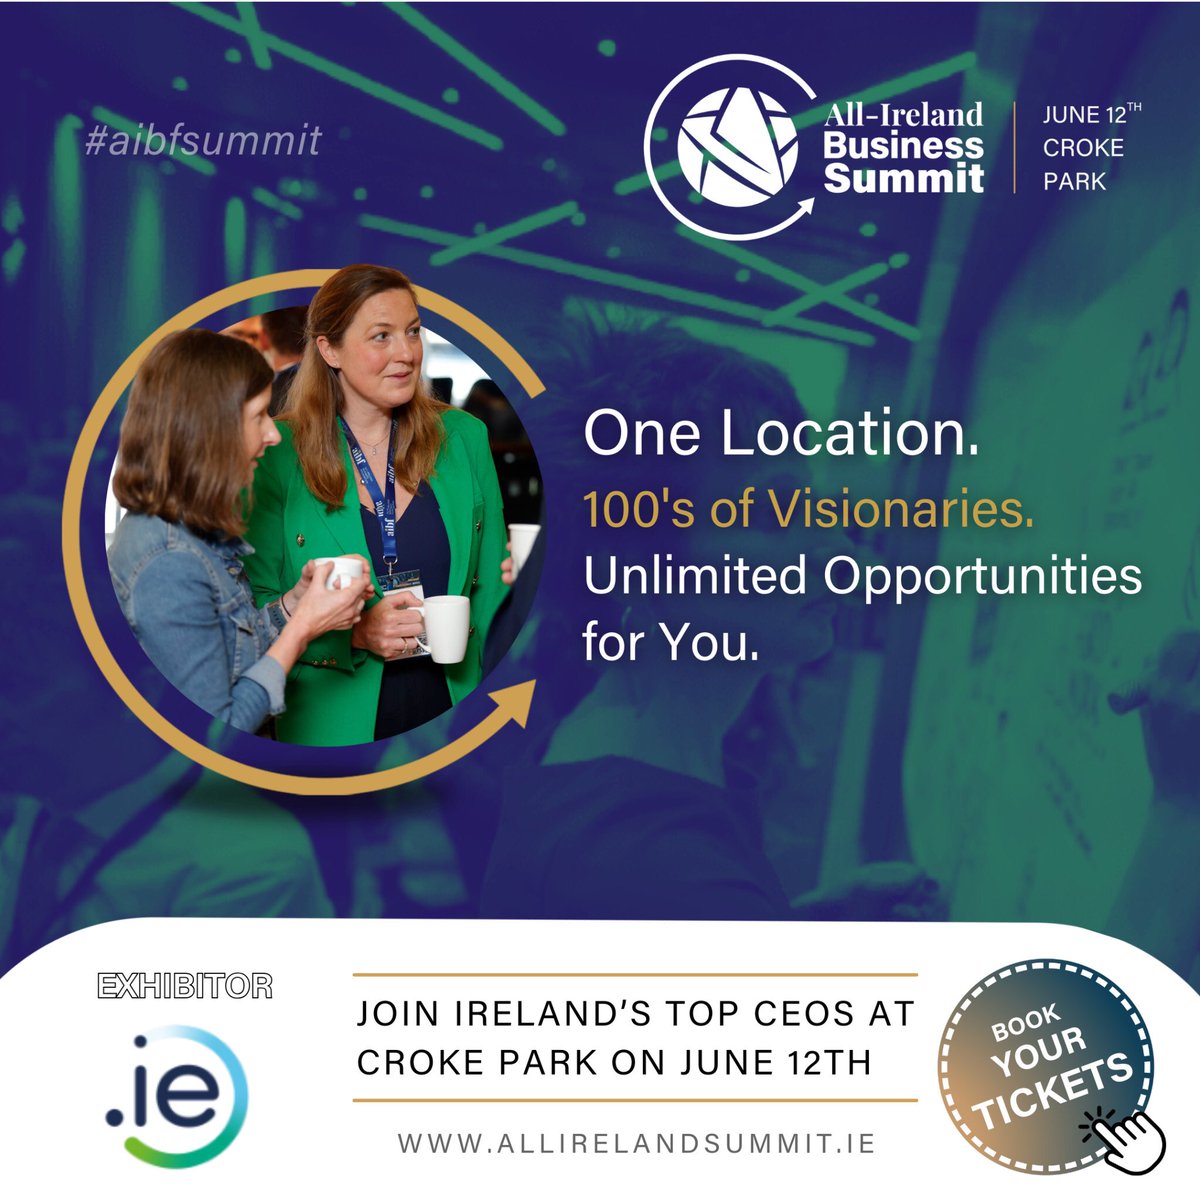 In the game for a Website Domain name? Check out .IE who we’re delighted to have on board as an exhibitor in Croke Park on June 12th. 📈🤝 Register your interest to be part of this leading business event: 👉🏻allirelandsummit.com #aibfsummit #BusinessAllStars #Technology